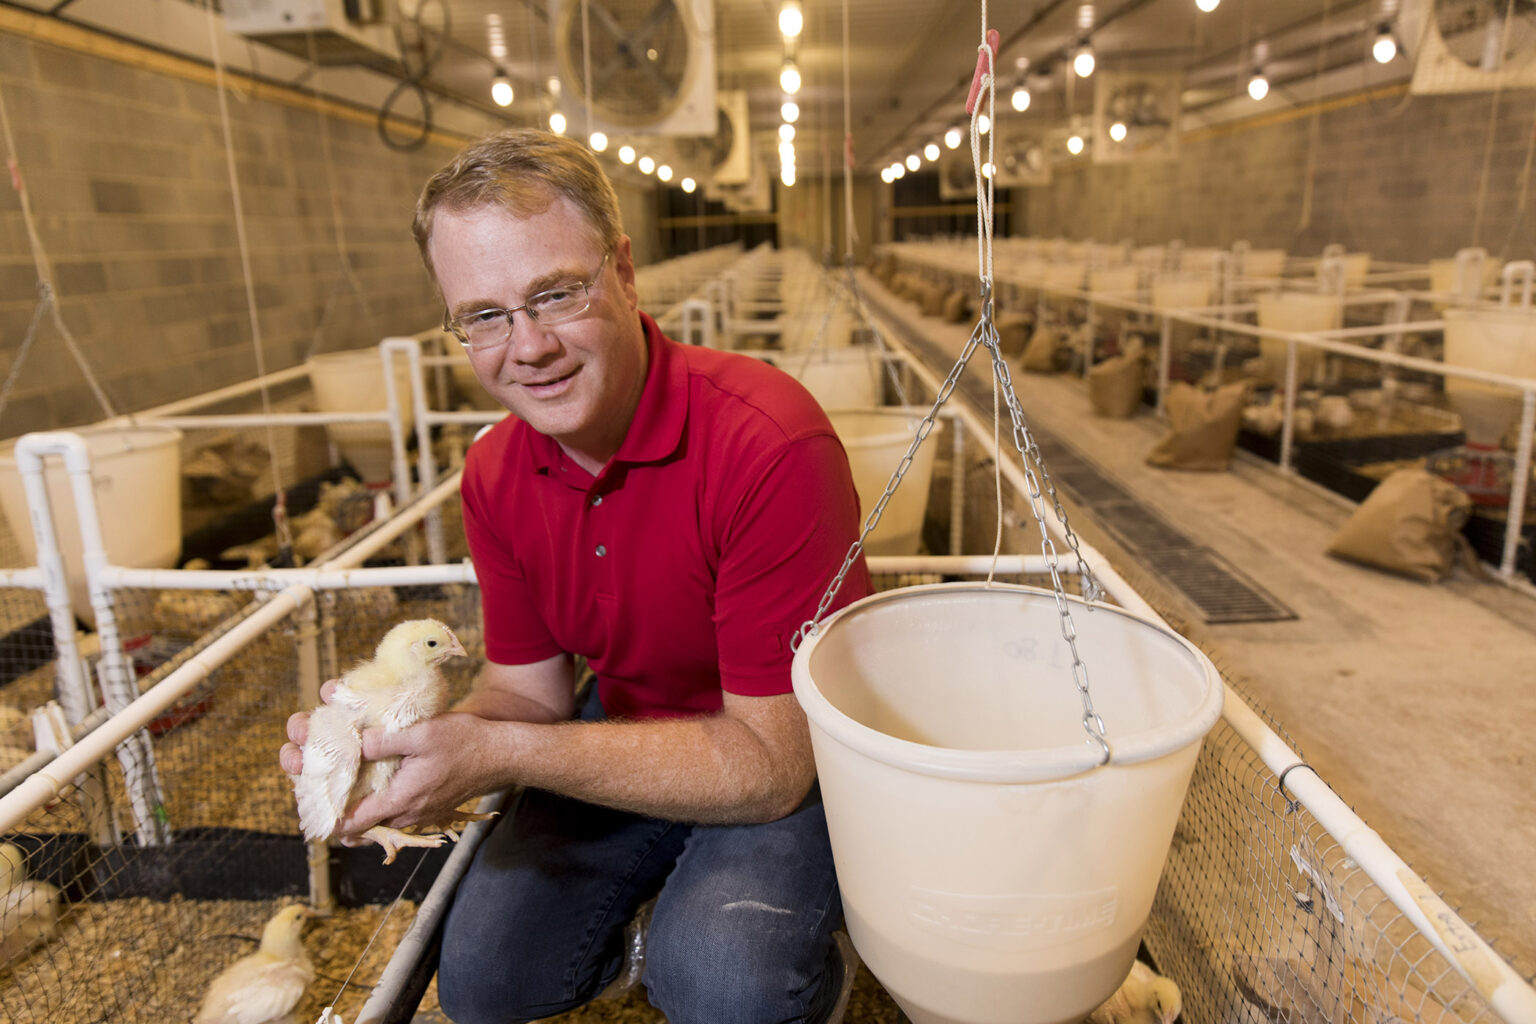 Todd Applegate, head of the Department of Poultry Science at CAES, will be the inaugural holder of the R. Harold and Patsy Harrison Distinguished Professorship in Poultry Science.